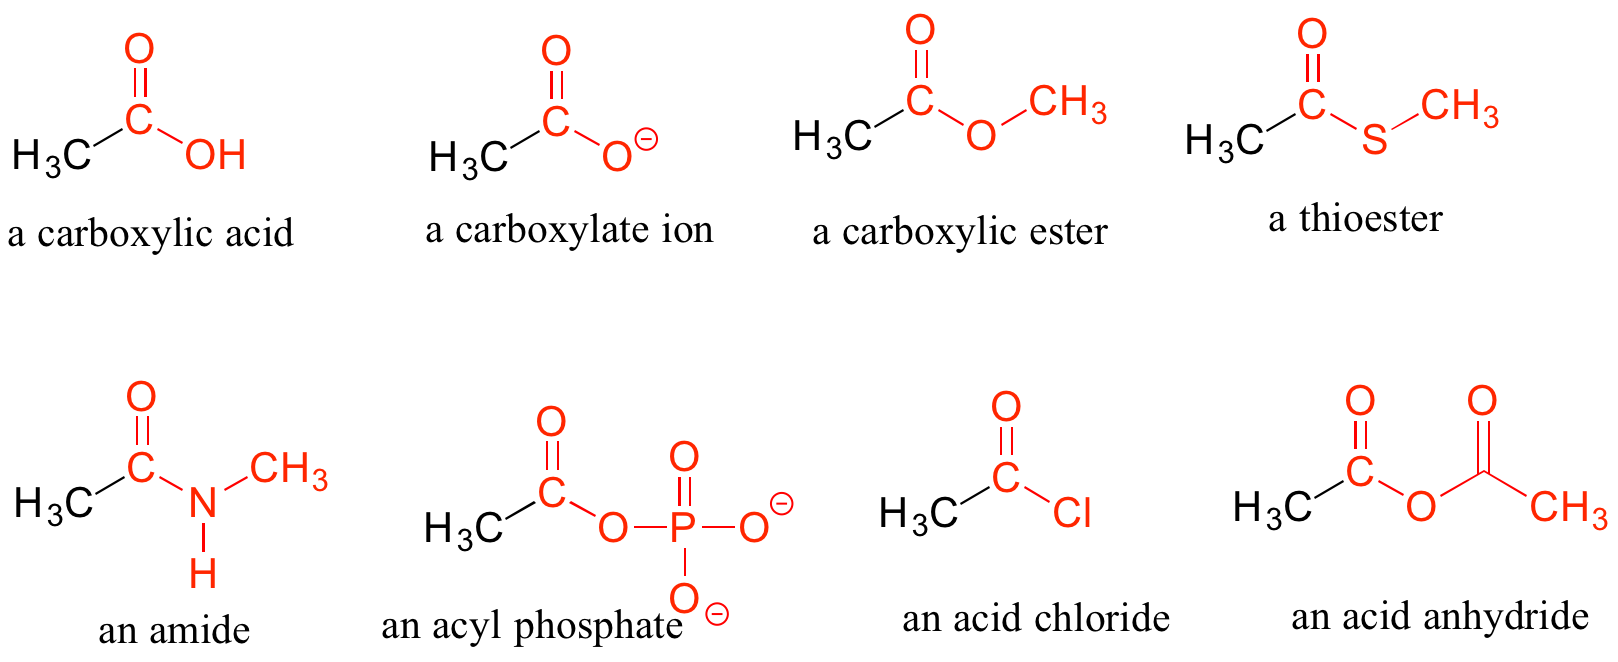 A variety of carboxylic acids and their derivatives are shown with structures and names, including a carboxylic acid, a carboxylate ion, a carboxylic ester, a thioester, an amide, an acyl phosphate, an acid chloride, and an acid anhydride.